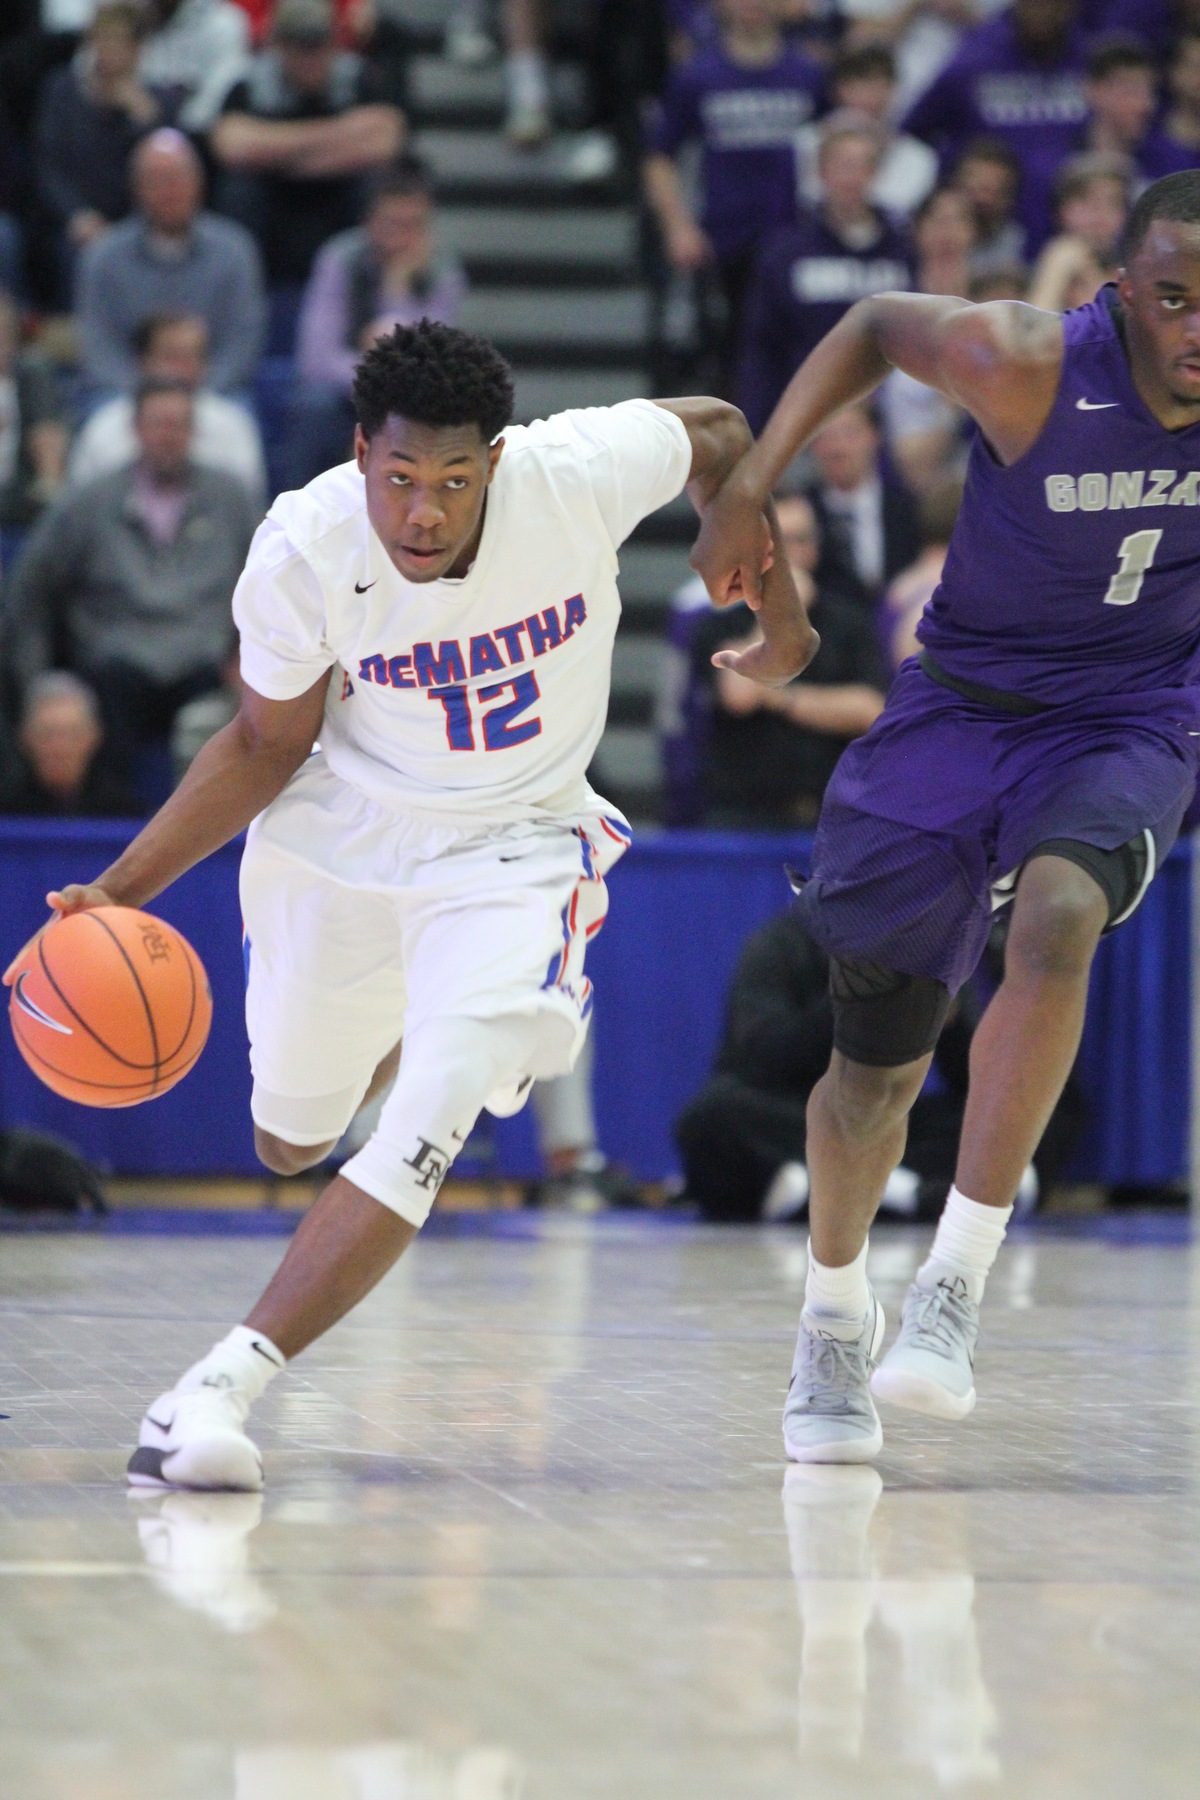 DeMatha Junior Josh Wallace (#12) will be part of a strong group of returning players for the Stags next year.